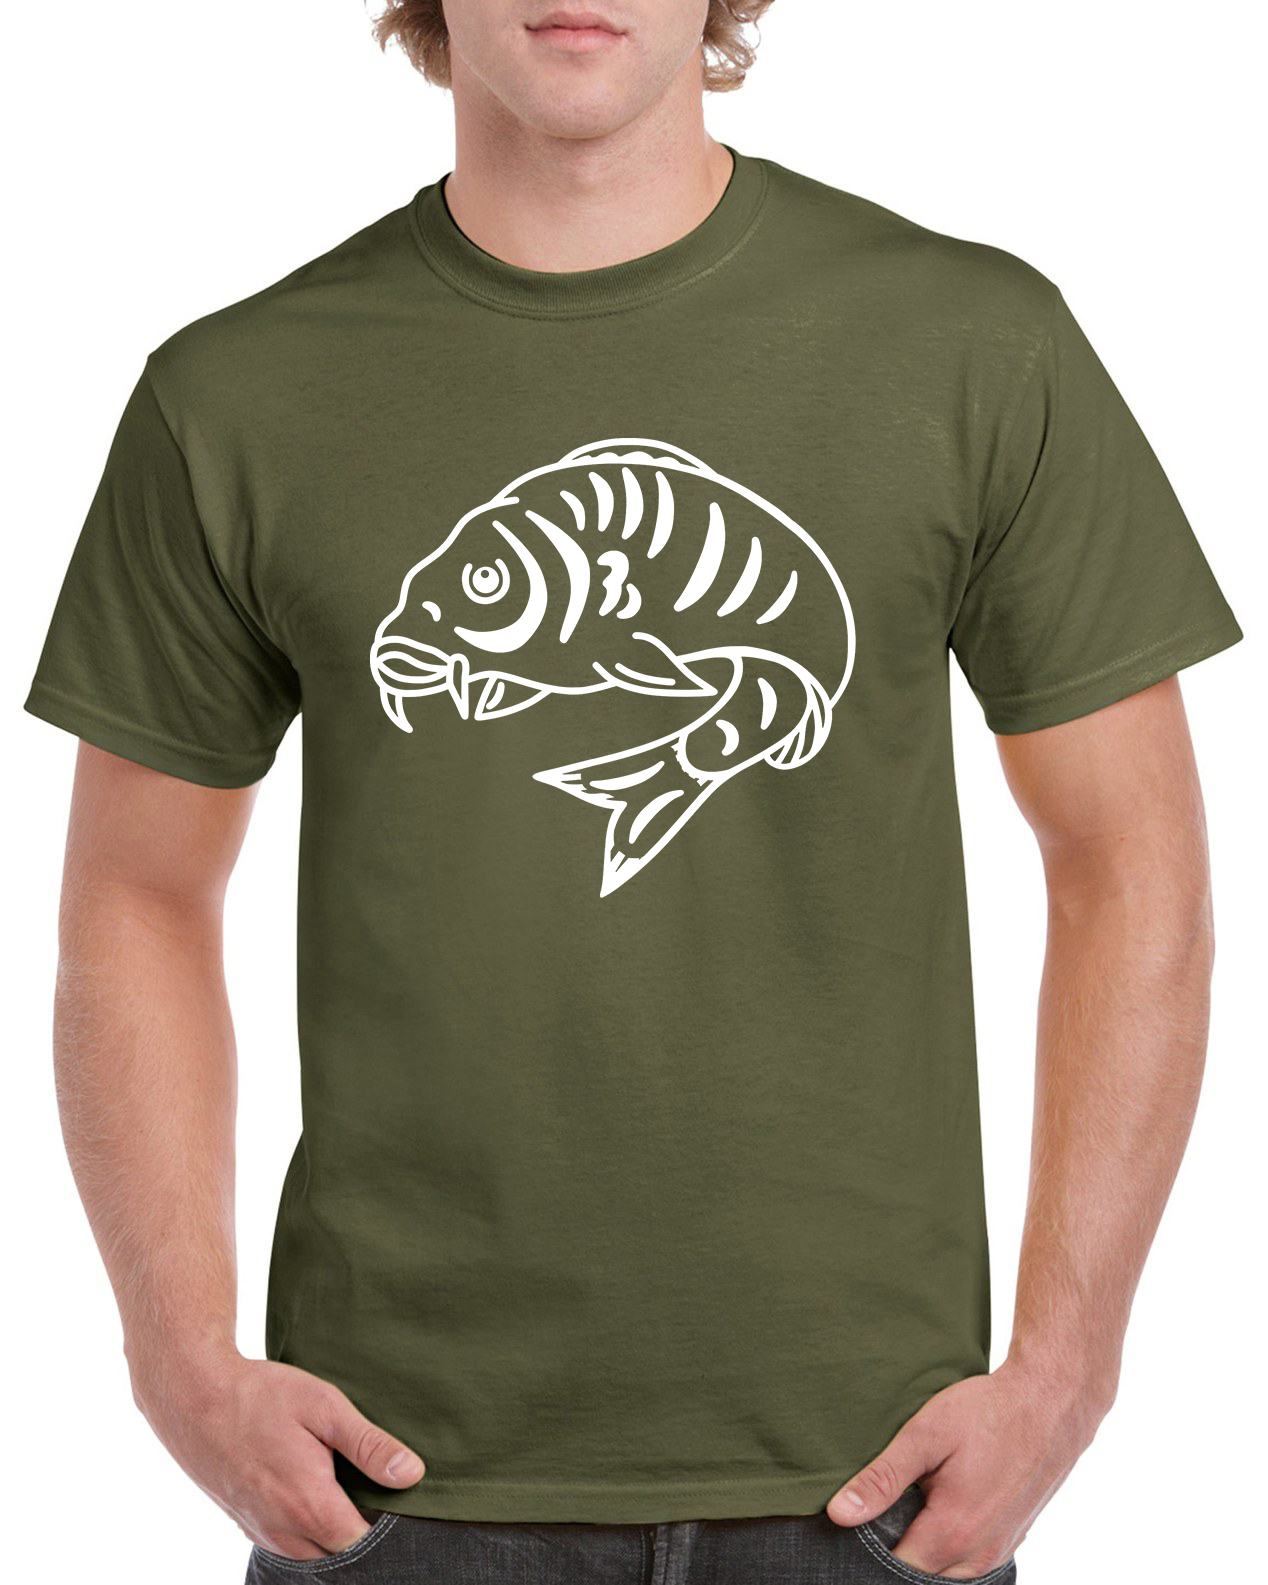 https://crazydecals.co.uk/cdn/shop/files/t-shirt-curled-fish-wht-grn.png?v=1704543713&width=1445